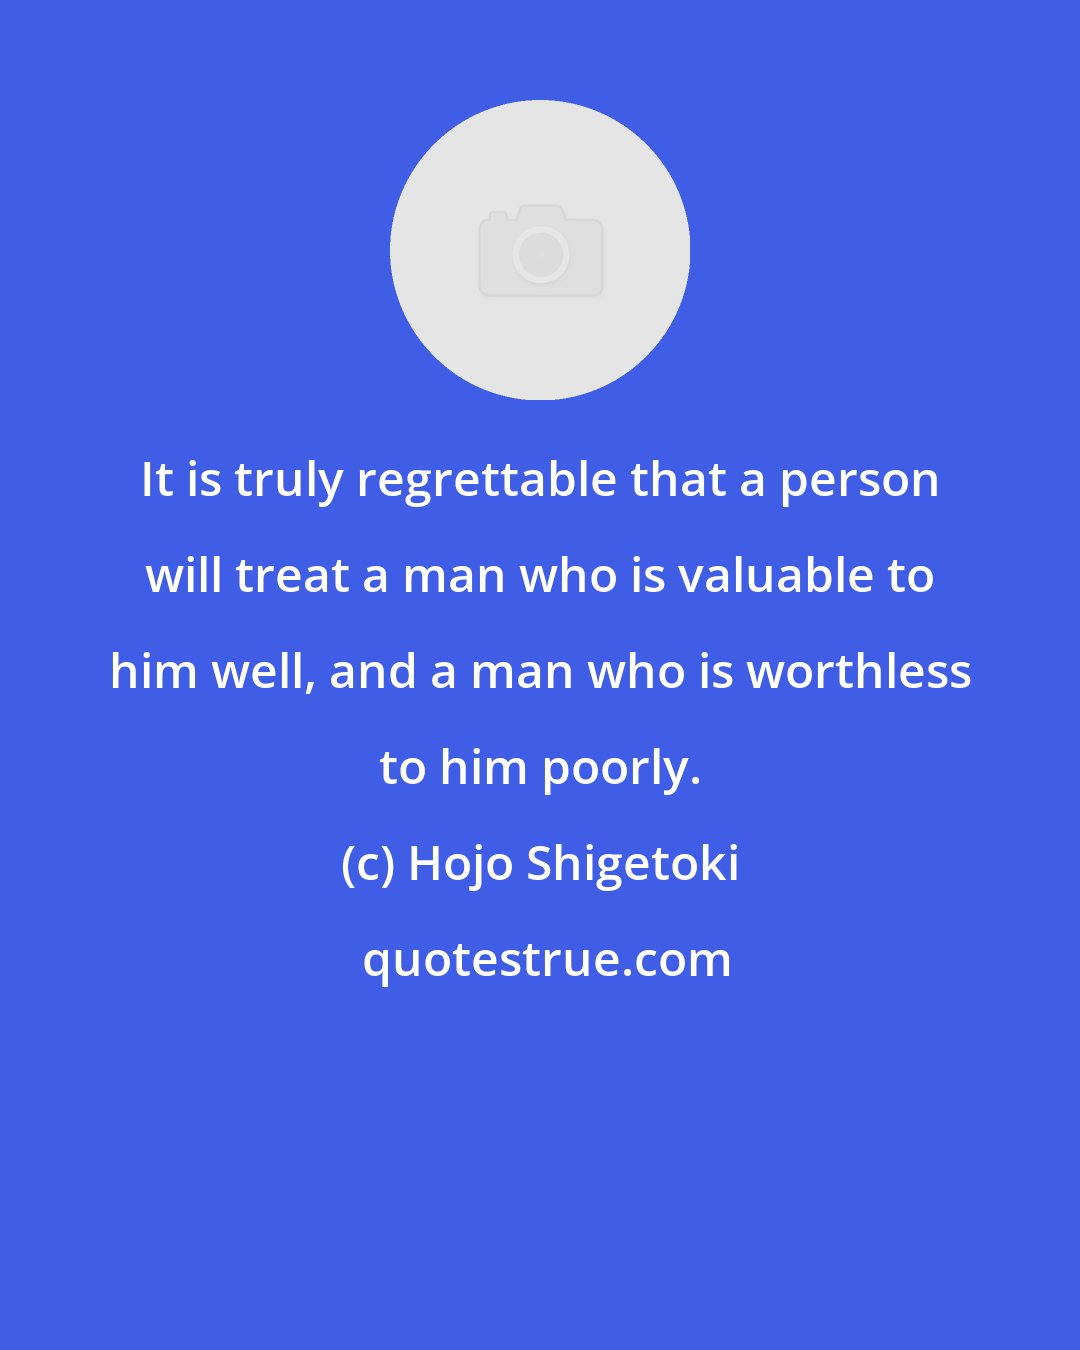 Hojo Shigetoki: It is truly regrettable that a person will treat a man who is valuable to him well, and a man who is worthless to him poorly.